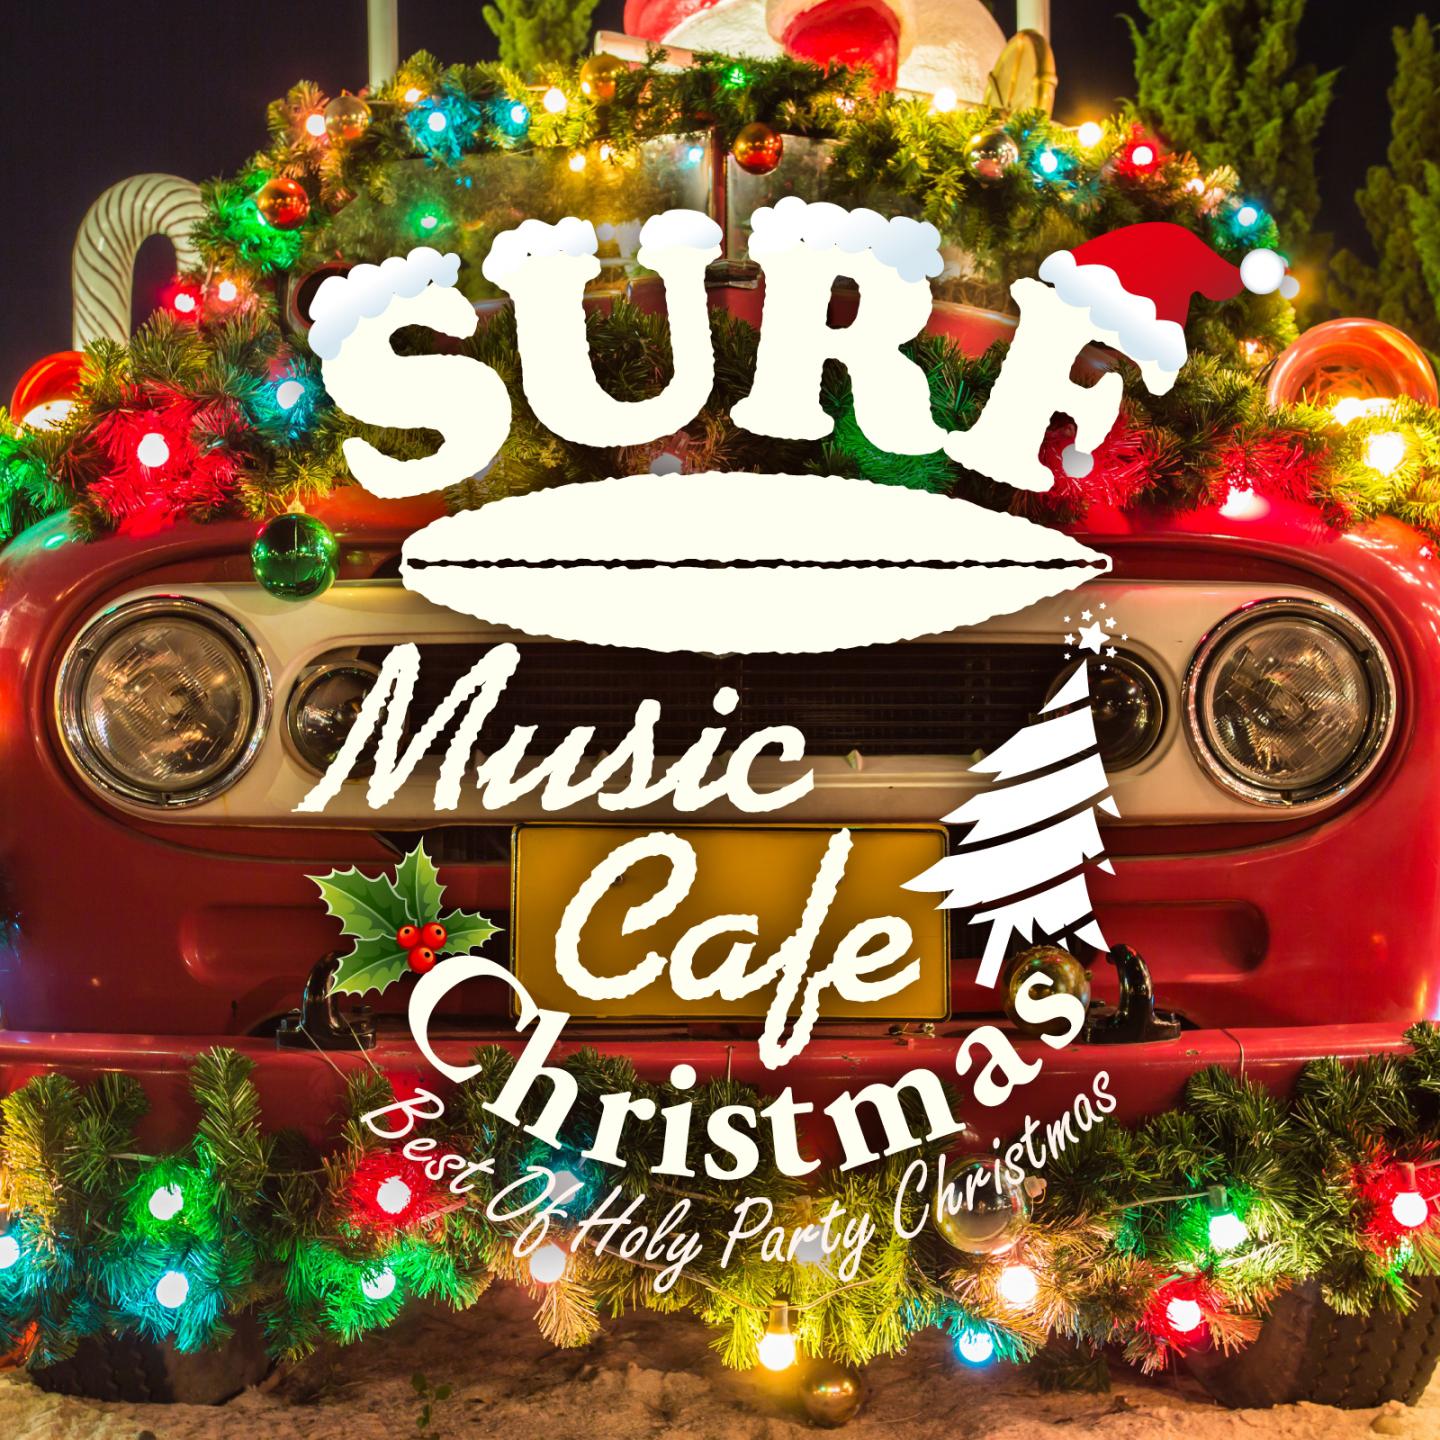 Постер альбома Surf Music Cafe Christmas - Best of Holy Party Christmas